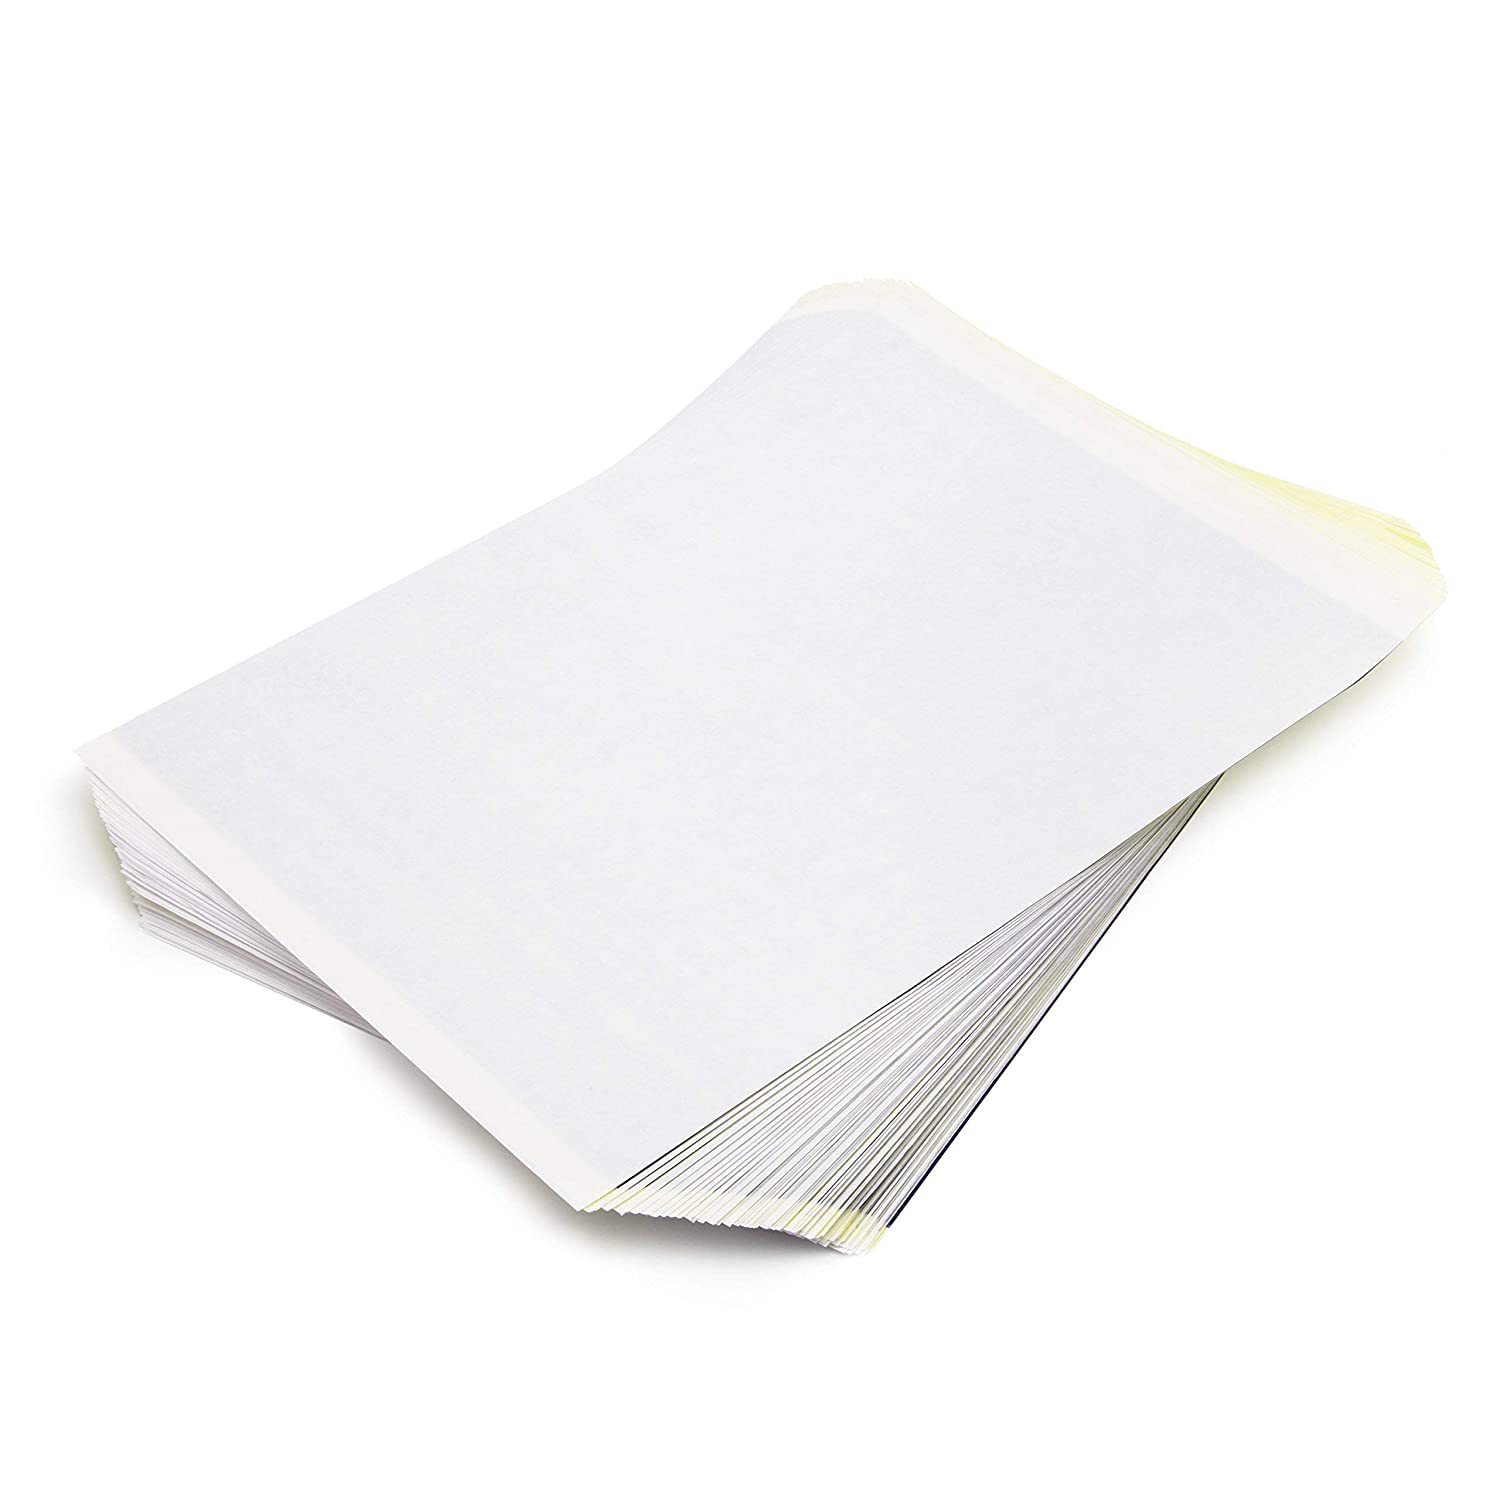 100 Sheets Tattoo Paper Transfer Paper A4 Tracing Paper Stencil Paper  Tattoos Graphite Pa 